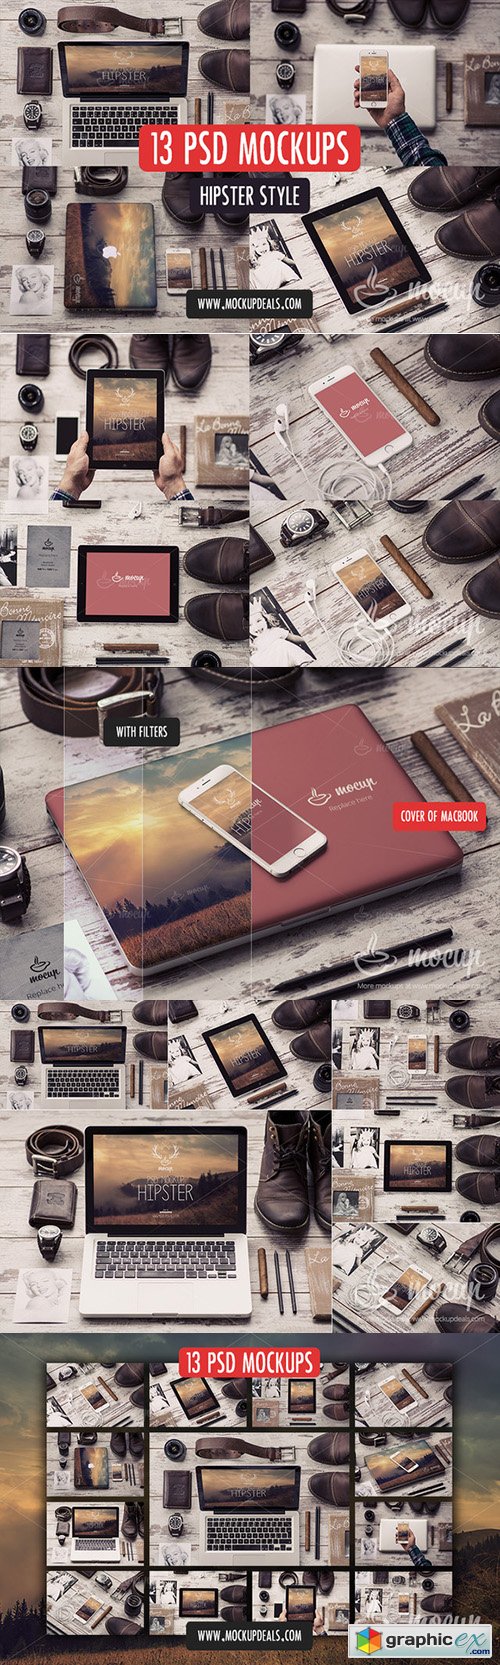 13 PSD Mockups Hipster Style